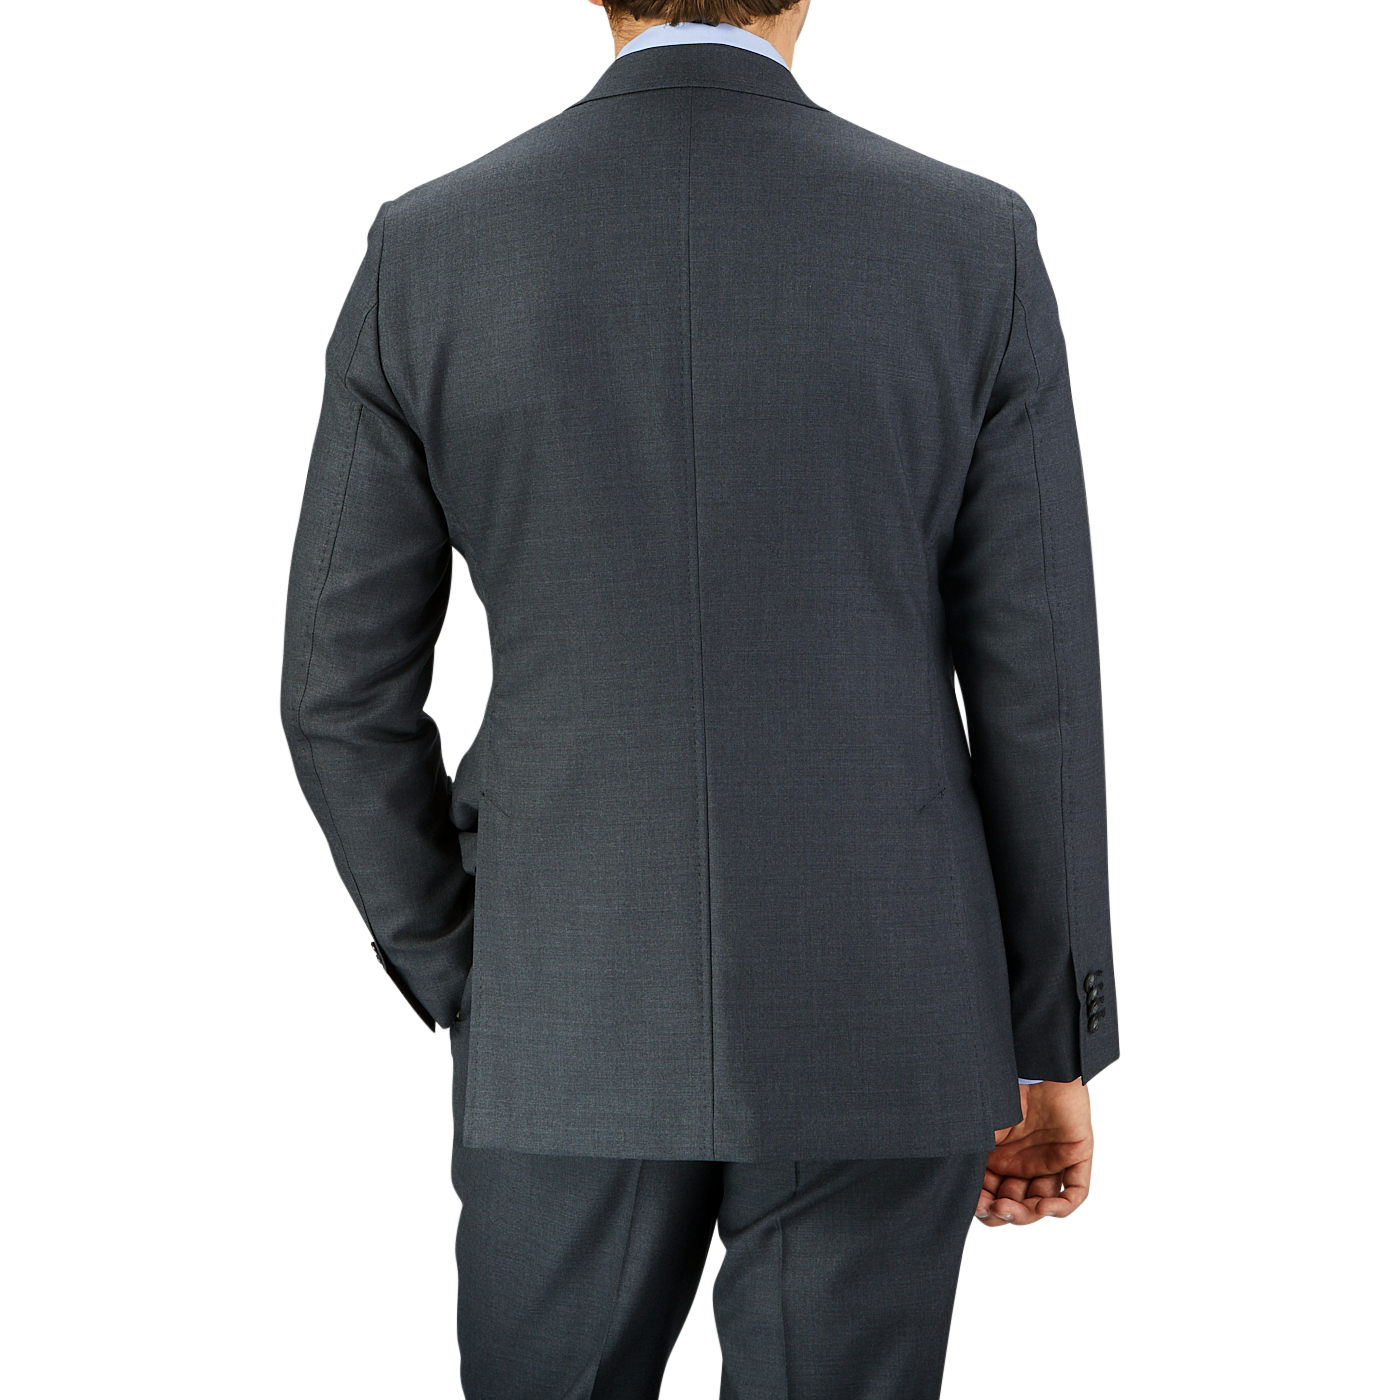 Rear view of a man wearing a tailored Baltzar Sartorial Grey Super 100's Wool Suit Jacket and pants, standing against a plain light grey background.